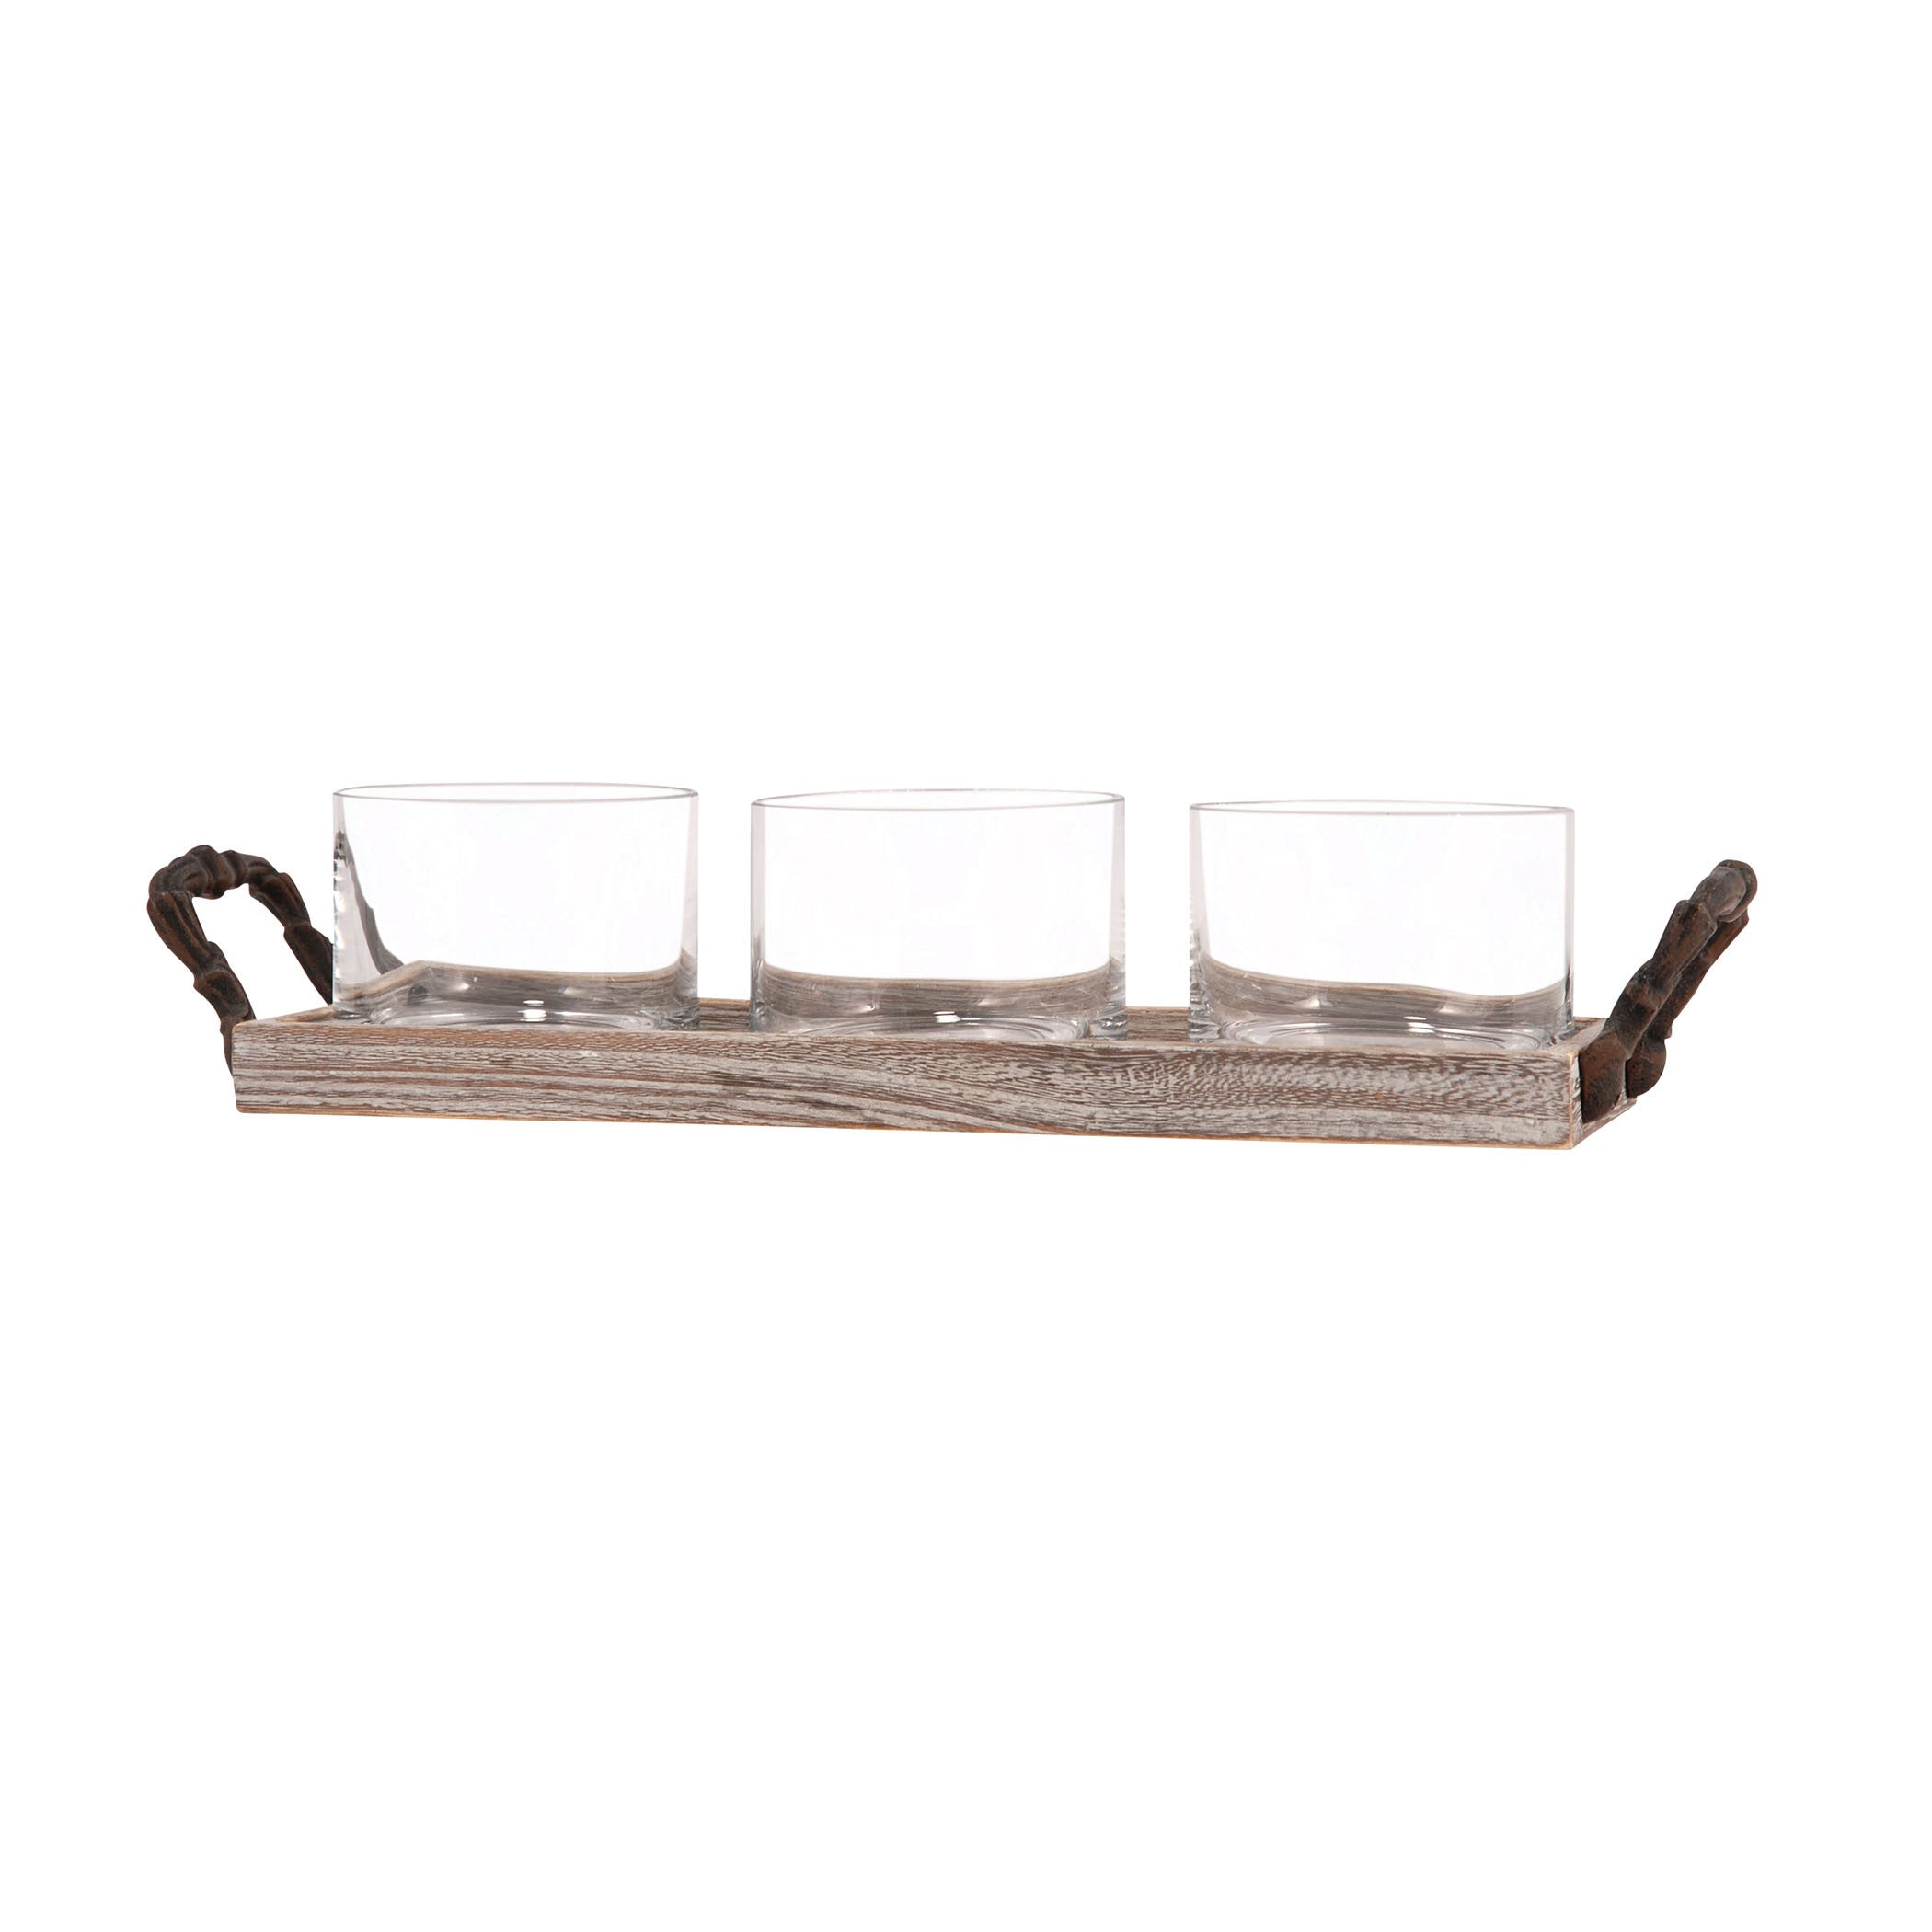 Pomeroy Pom-608506 Campagne Collection Rustic,ashwood,clear Finish Tray